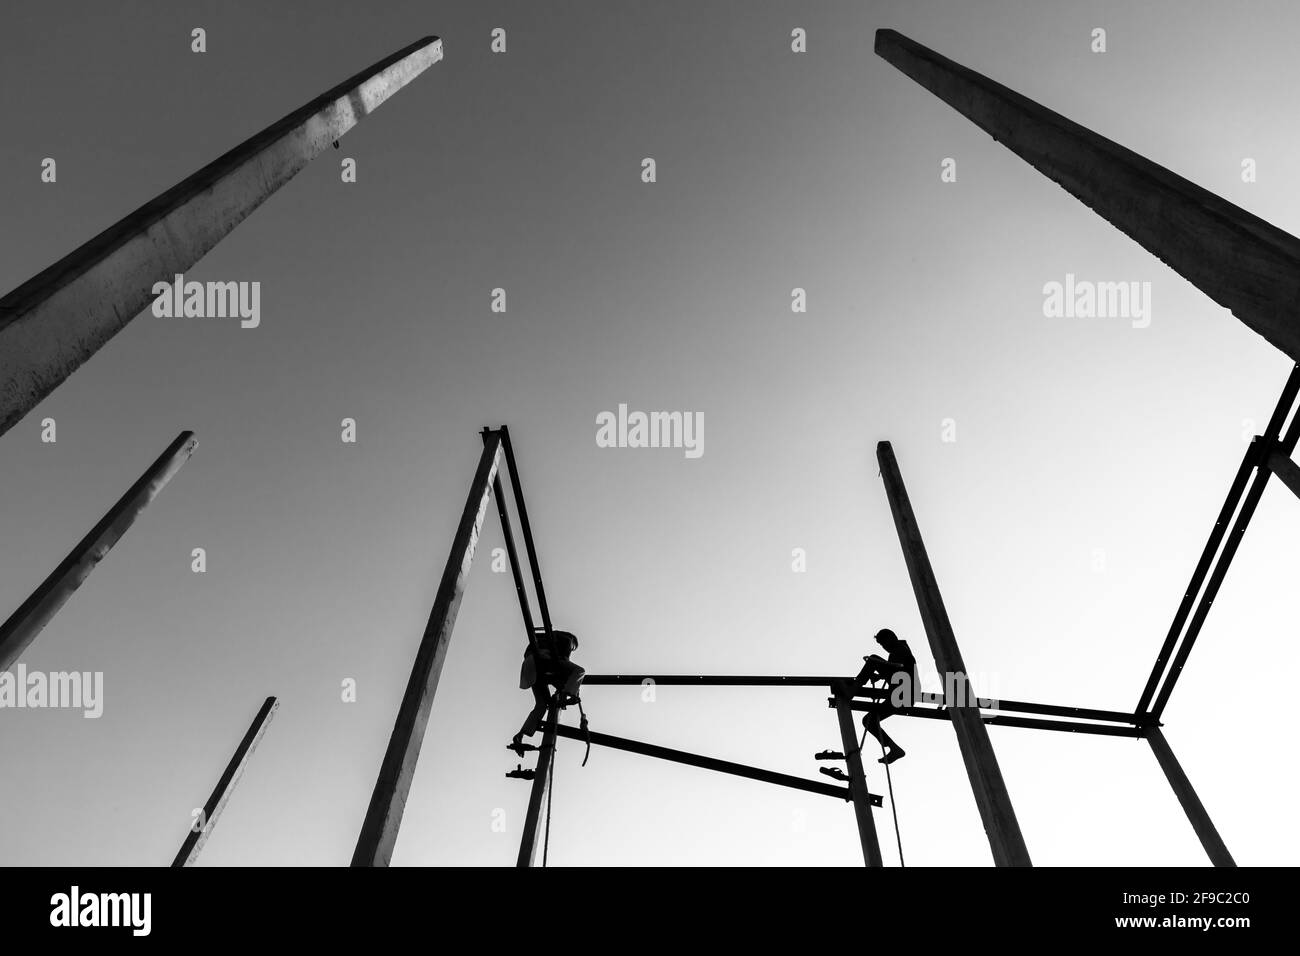 black and white silhouette of a two man sitting on electric pole. Stock Photo